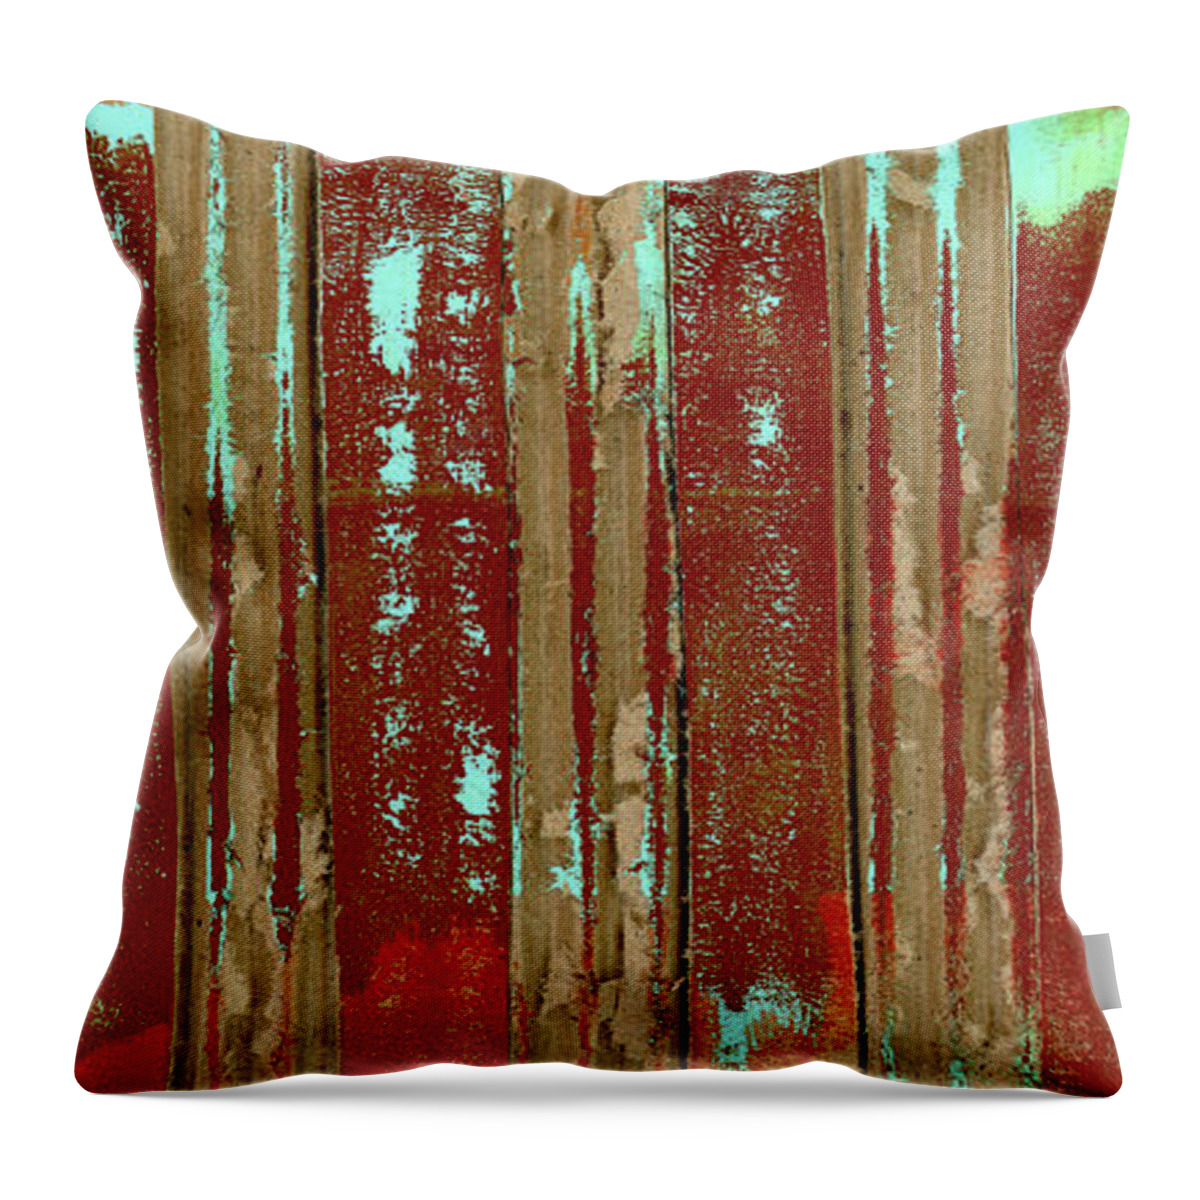 Corrugated Throw Pillow featuring the photograph Corrugation by Carol Leigh